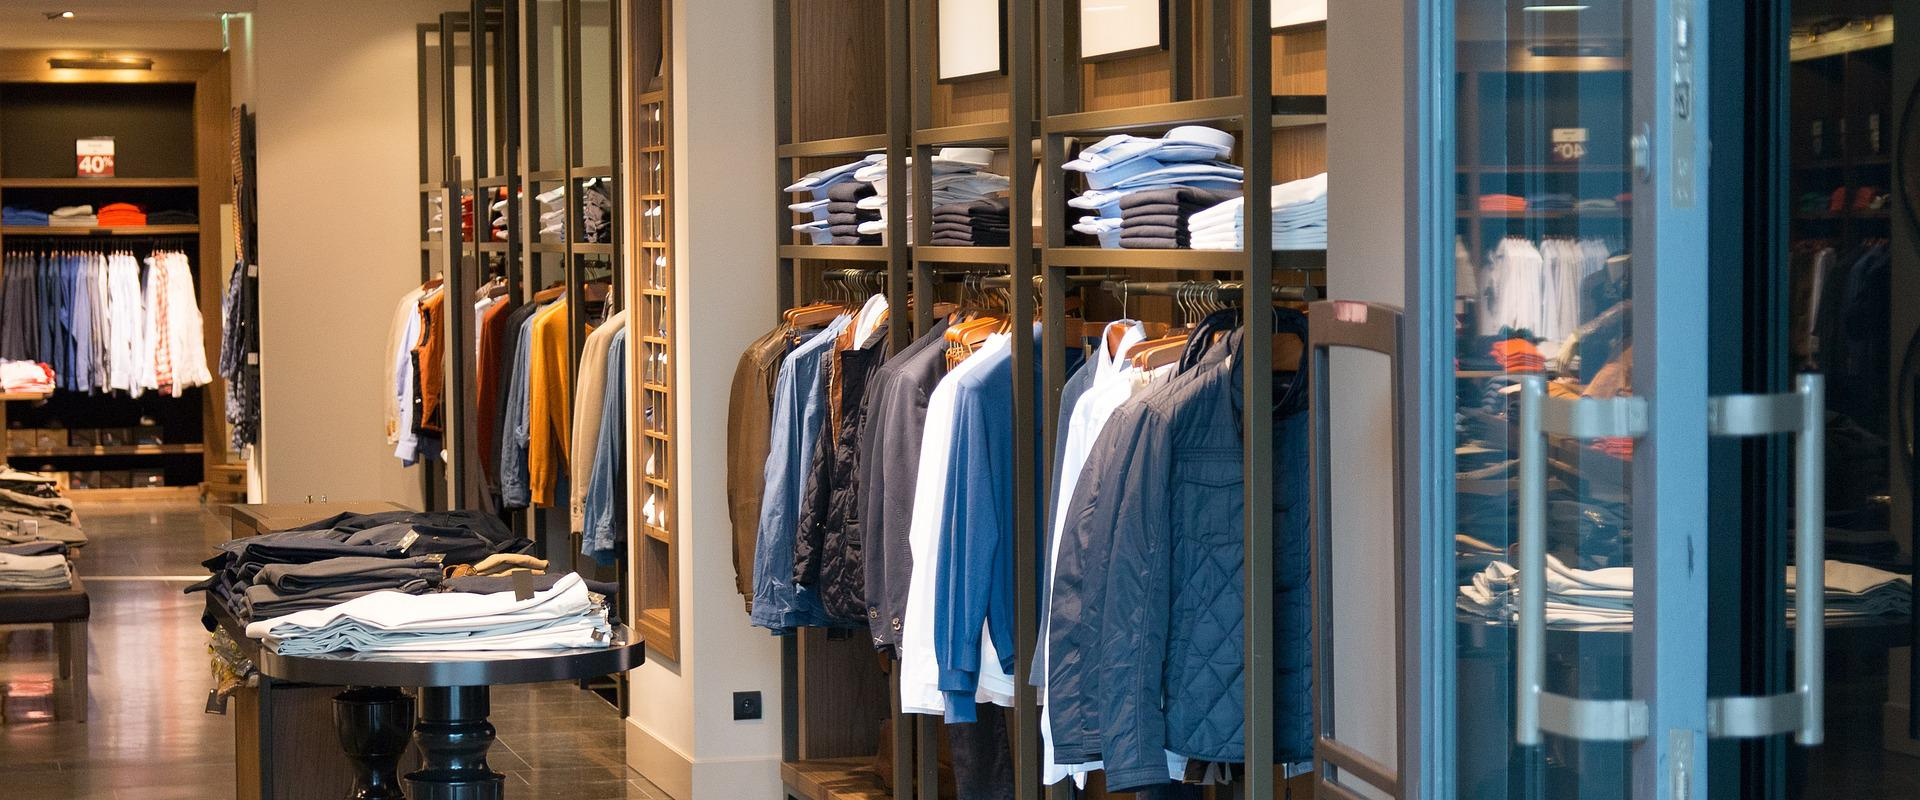 Invengo RFID Application For Retail